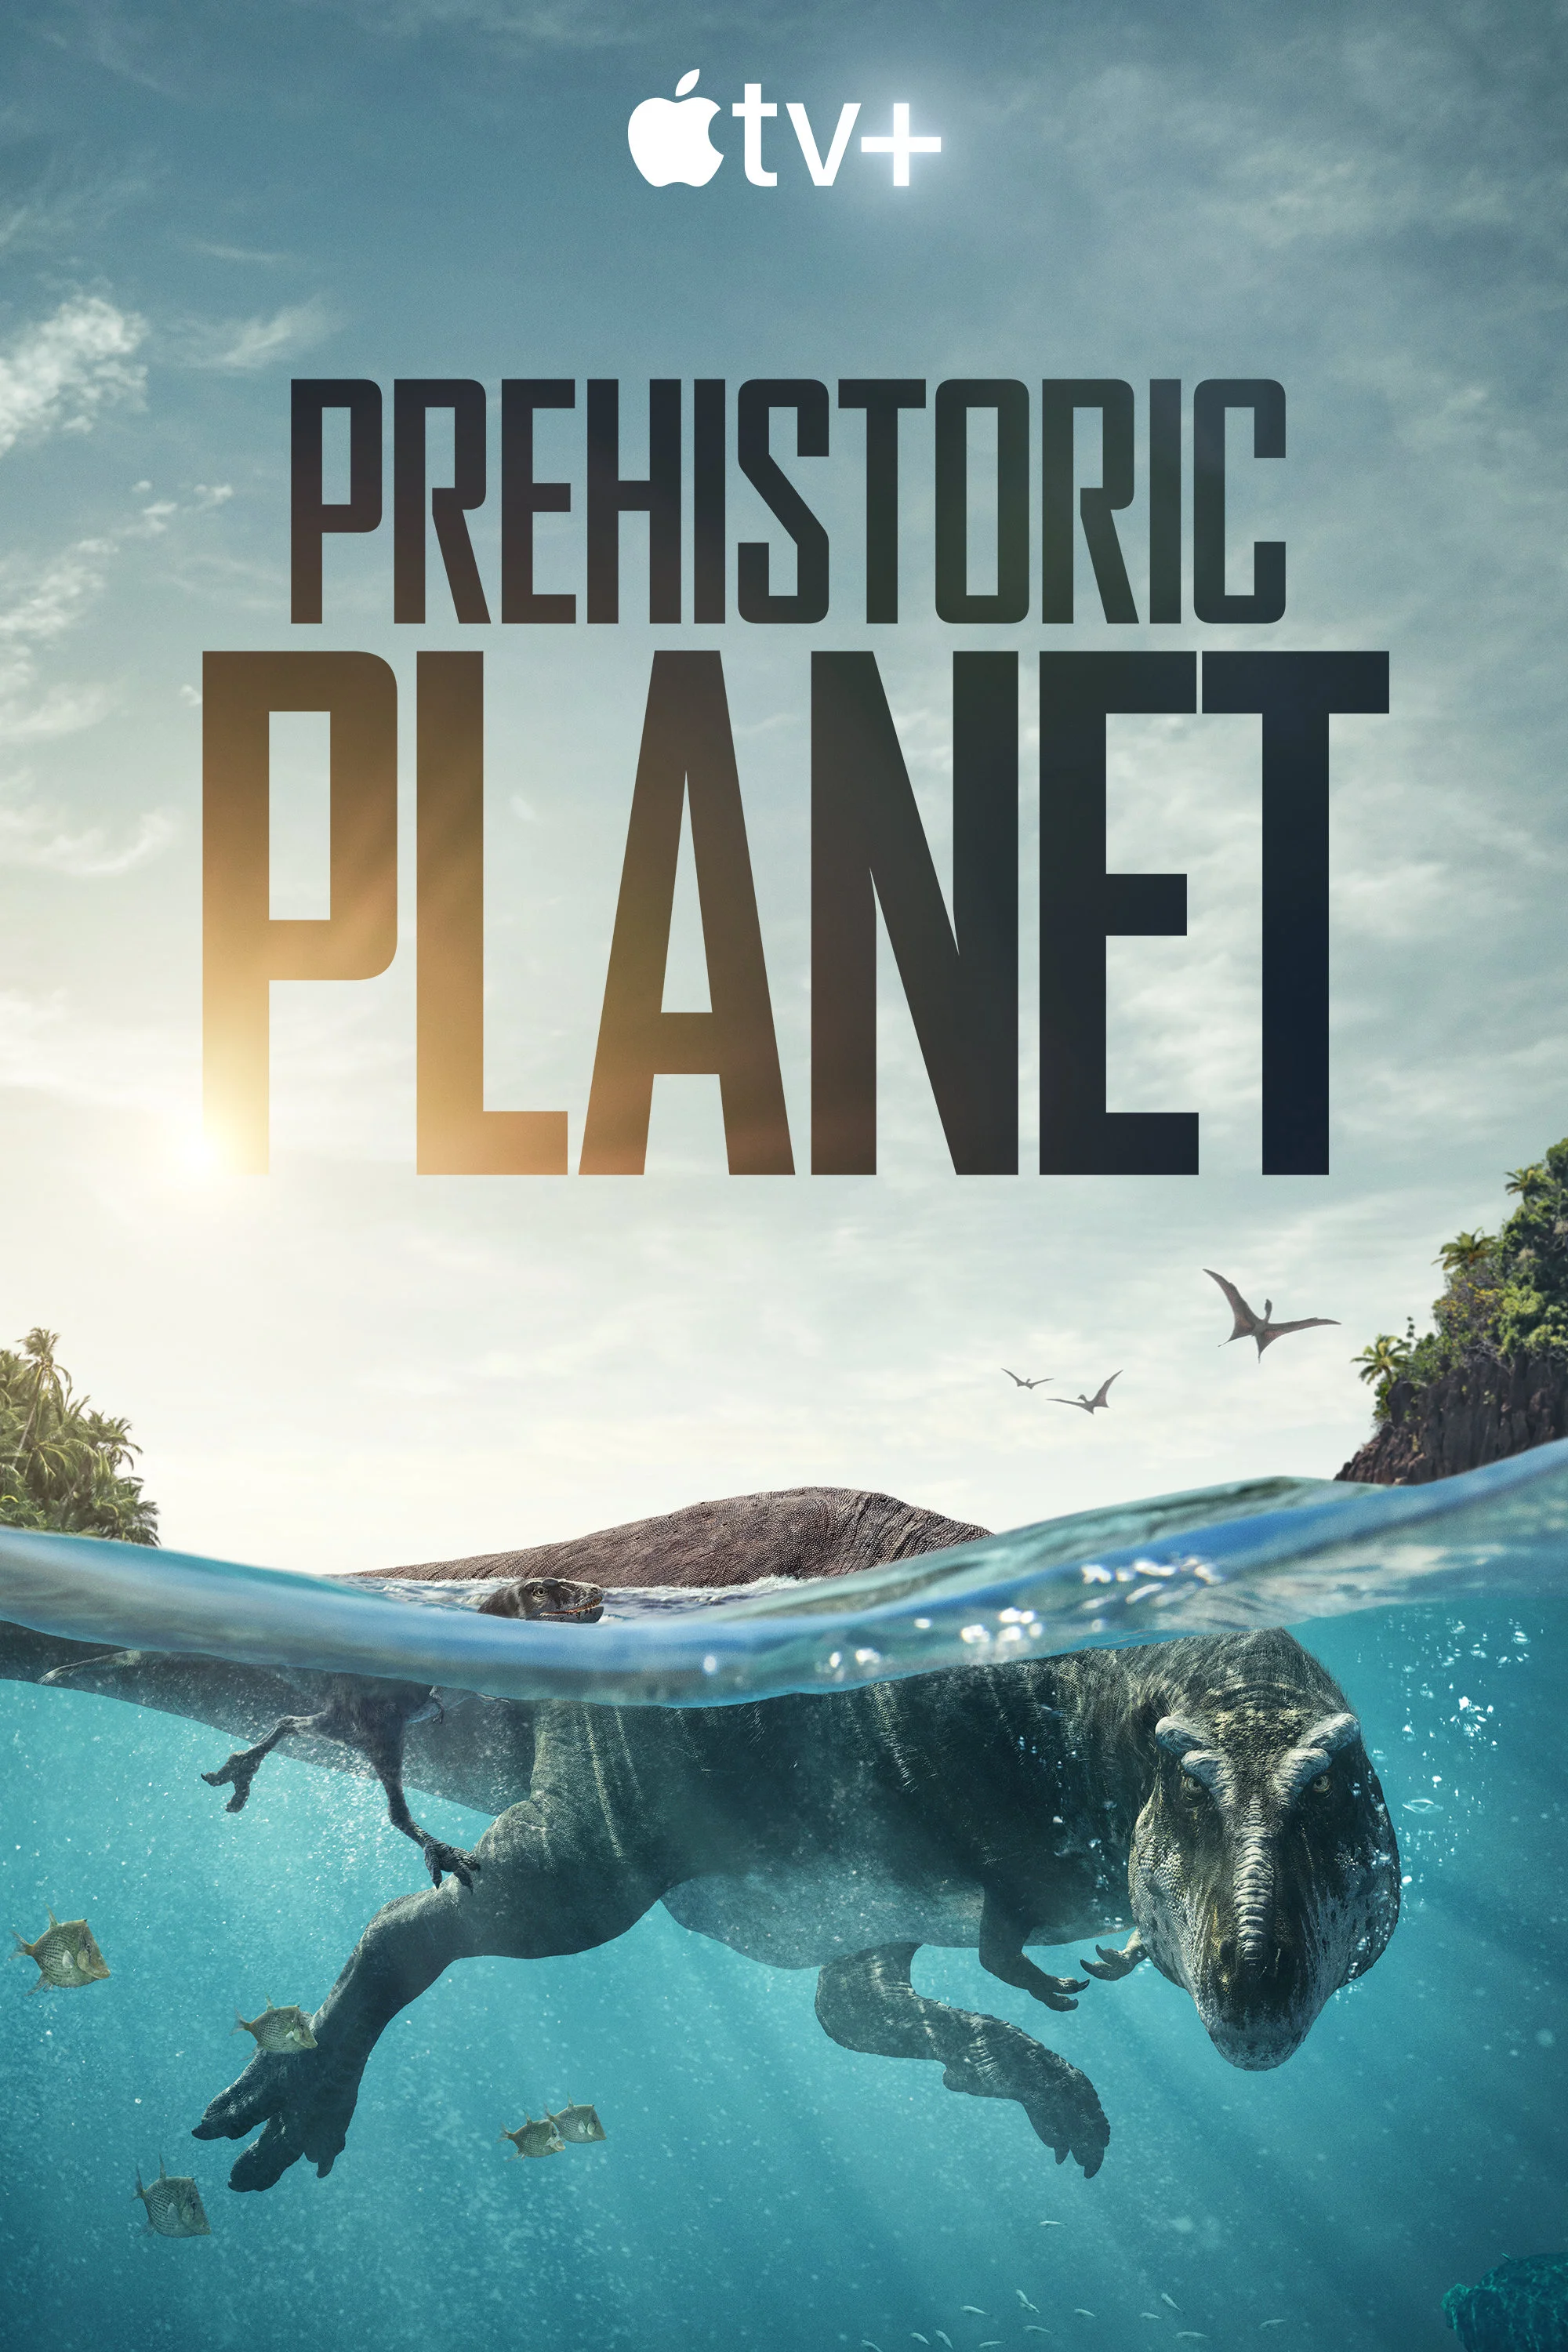 Apple TV+'s nature documentary series "Prehistoric Planet‎" releases Official Trailer and poster